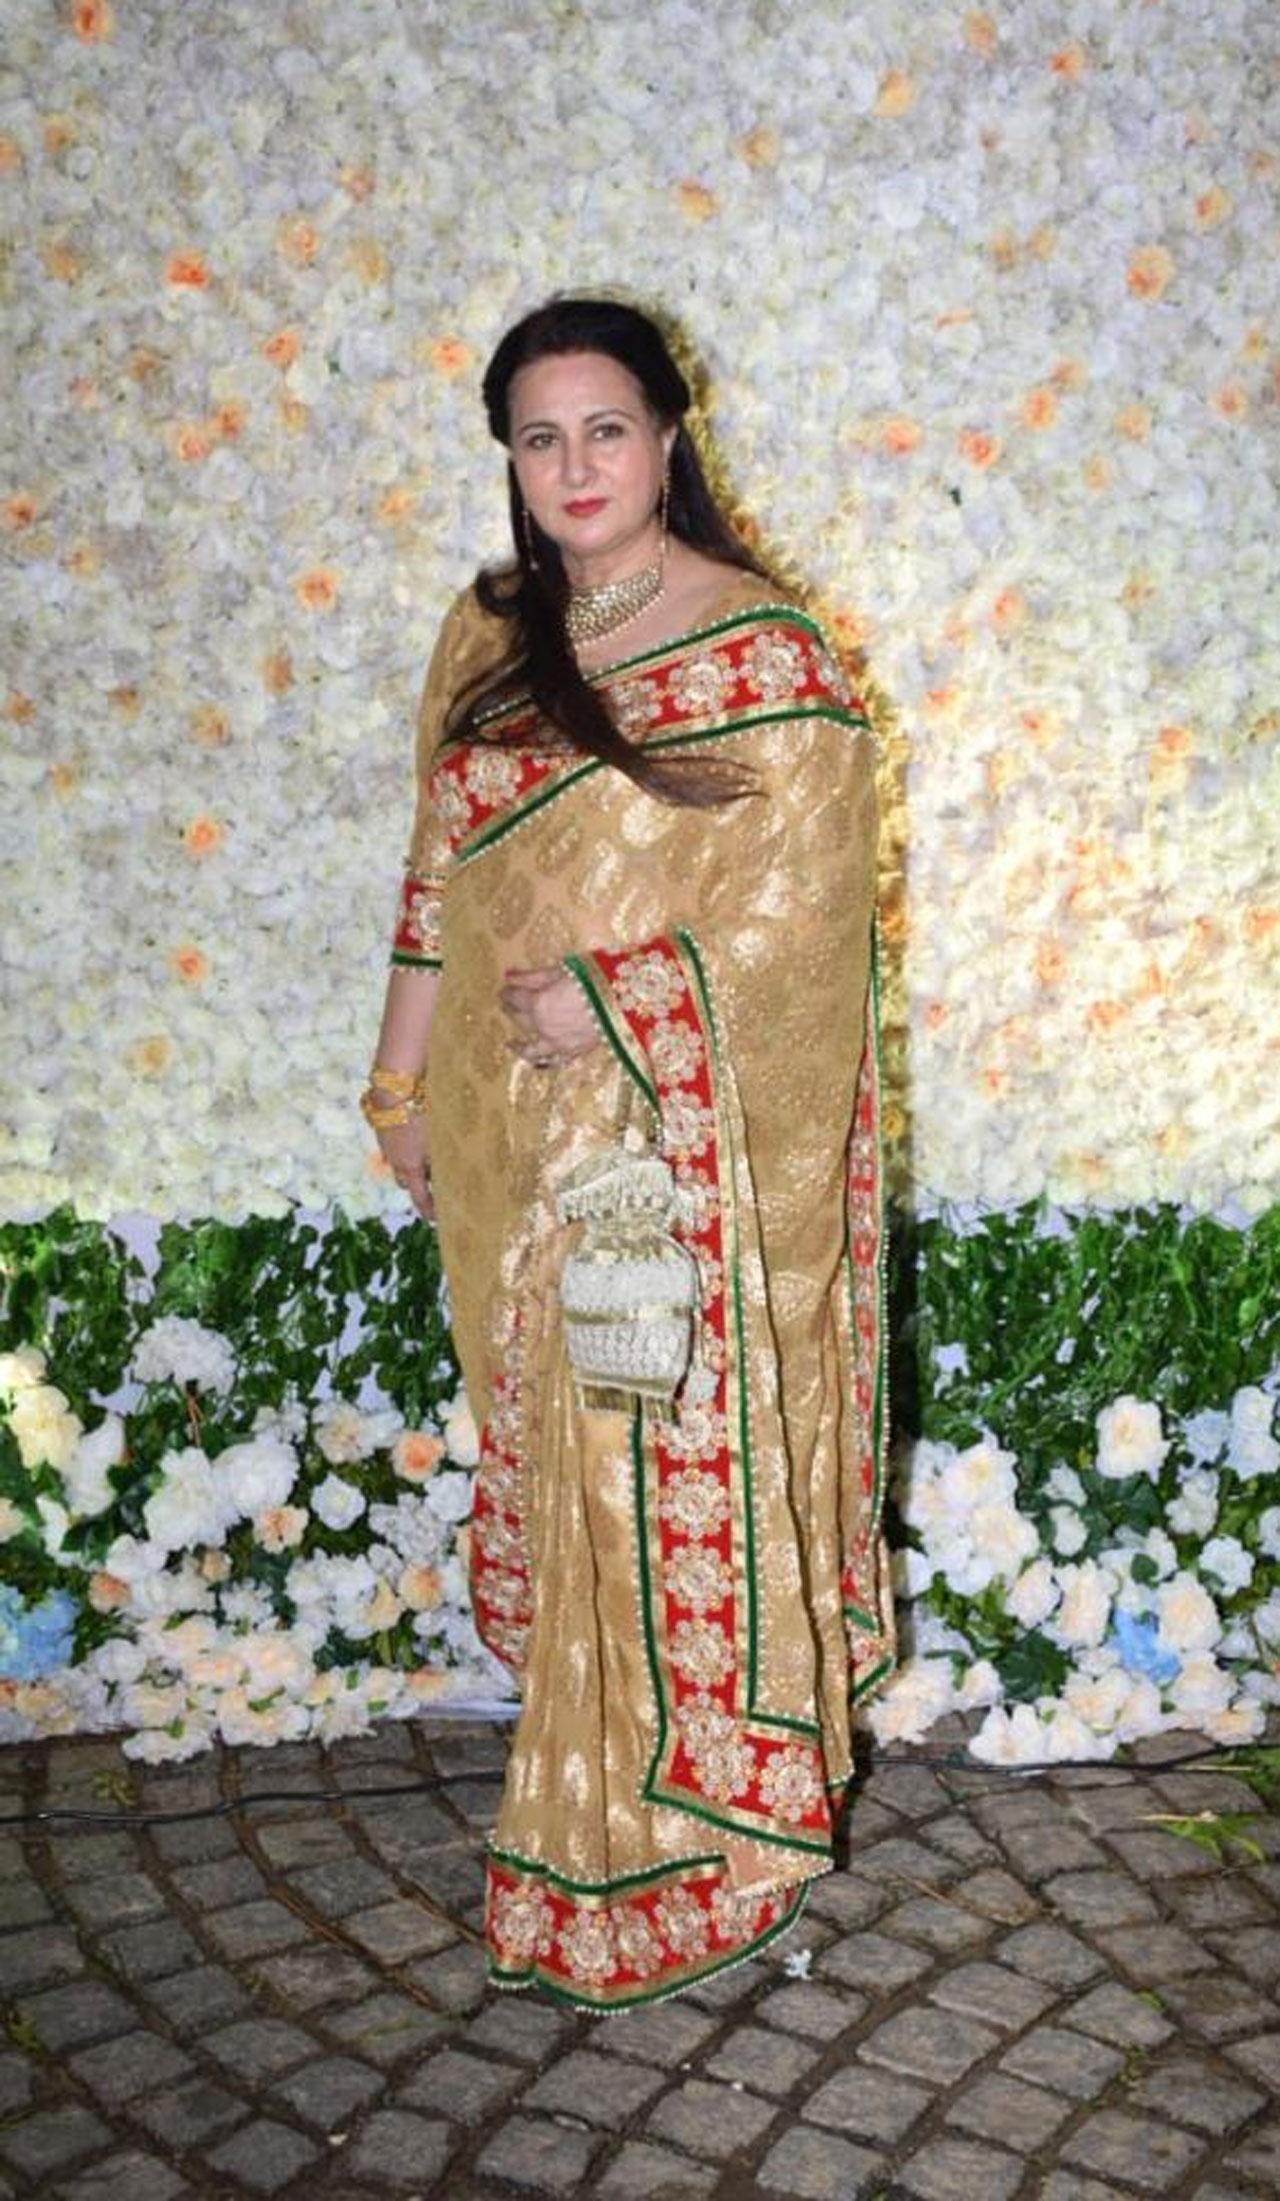 Veteran actress Poonam Dhillon arrived at Aditya and Anushka's wedding in a Golden saree with red embroidery and looked really pretty. 